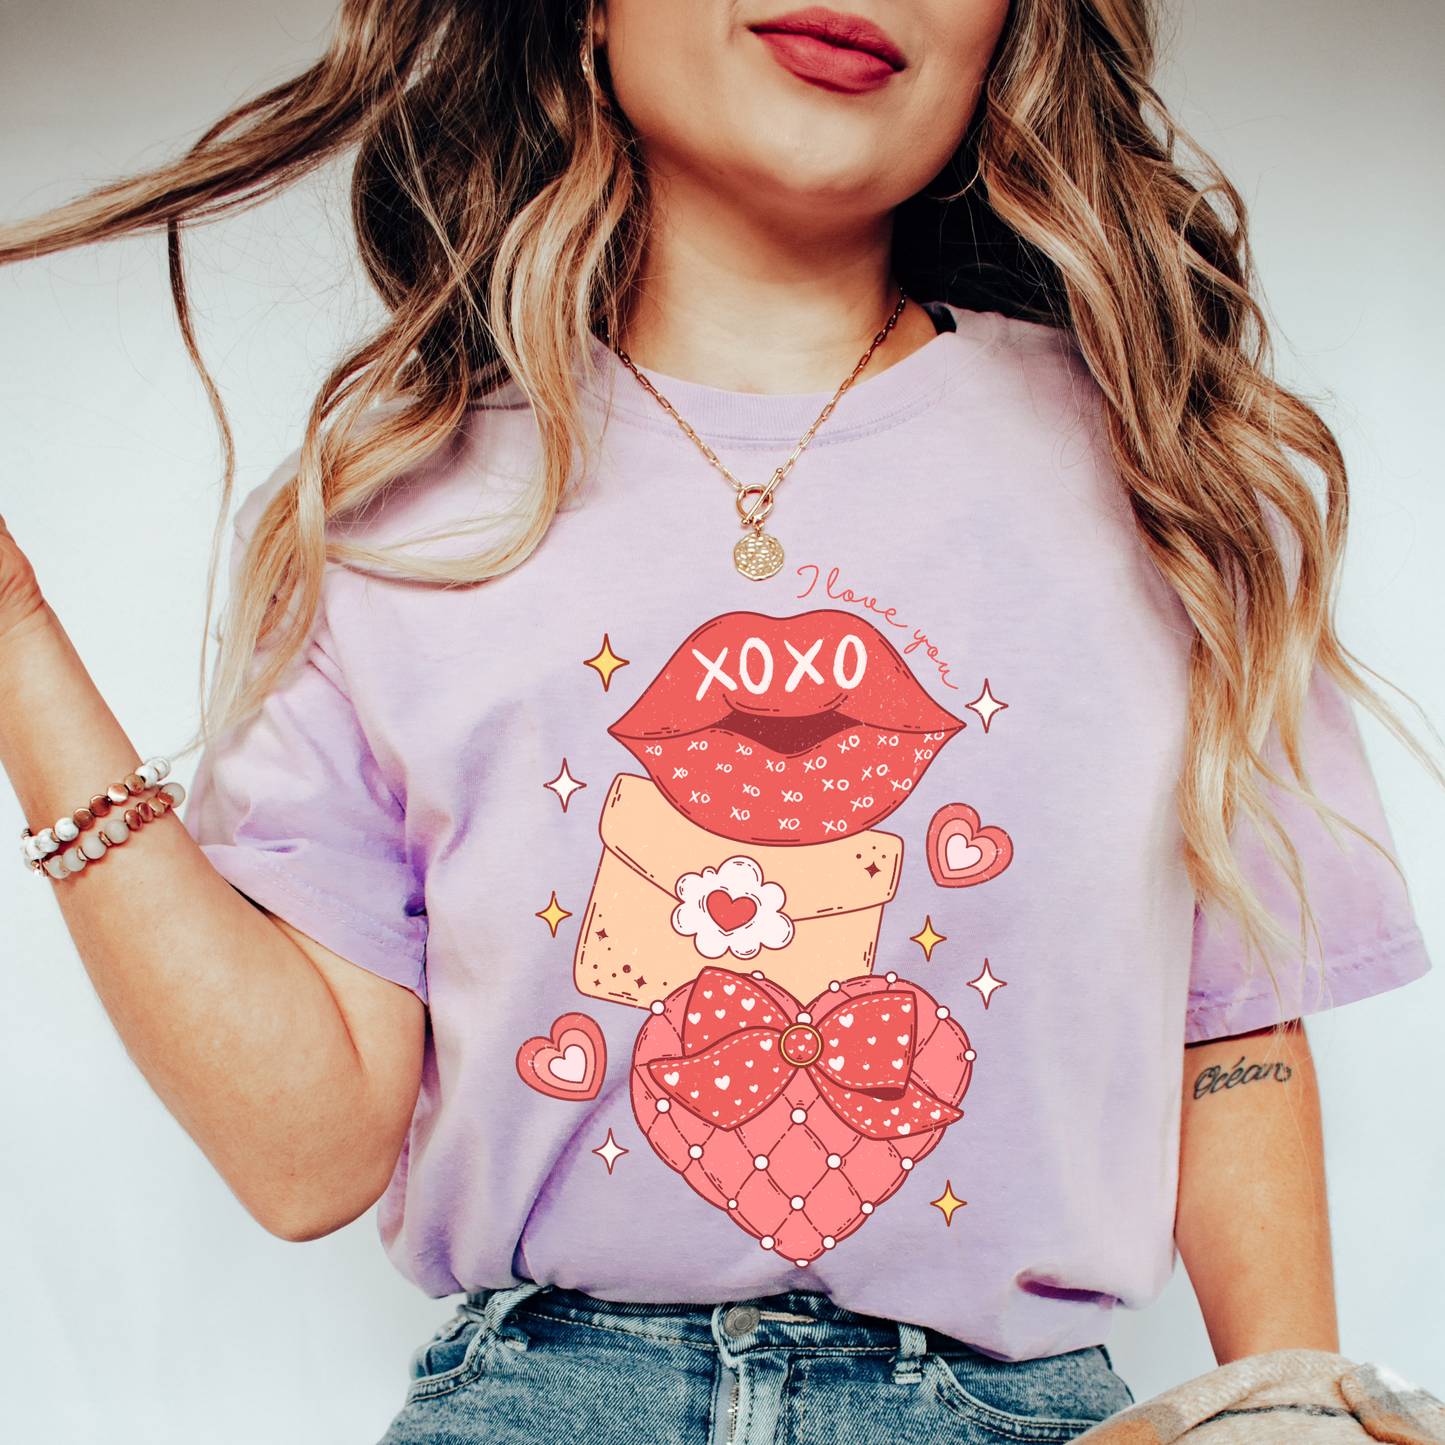 a woman wearing a shirt with a picture of a teddy bear on it